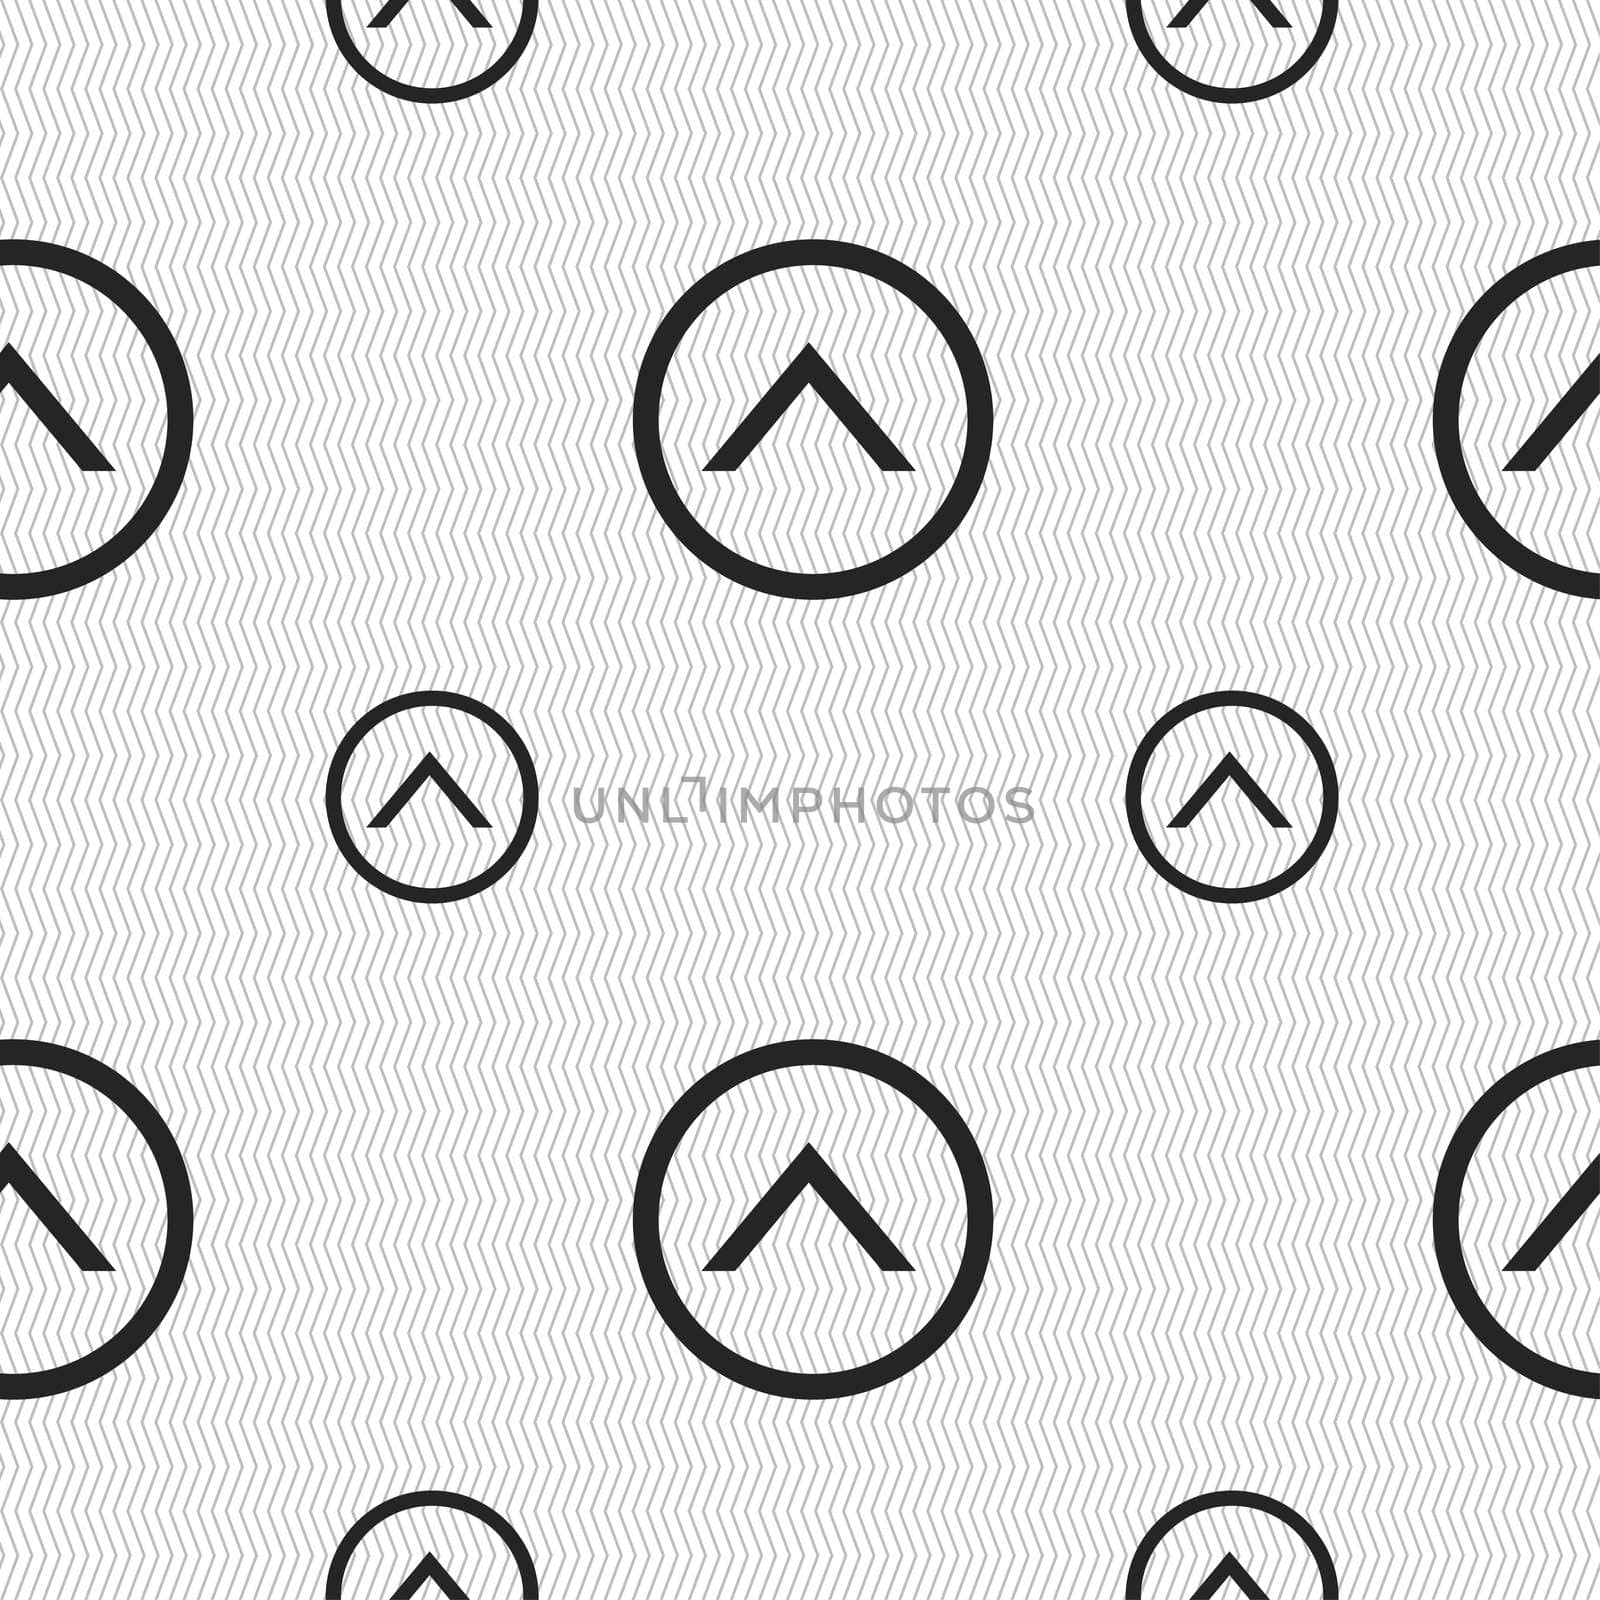 Direction arrow up icon sign. Seamless pattern with geometric texture. illustration